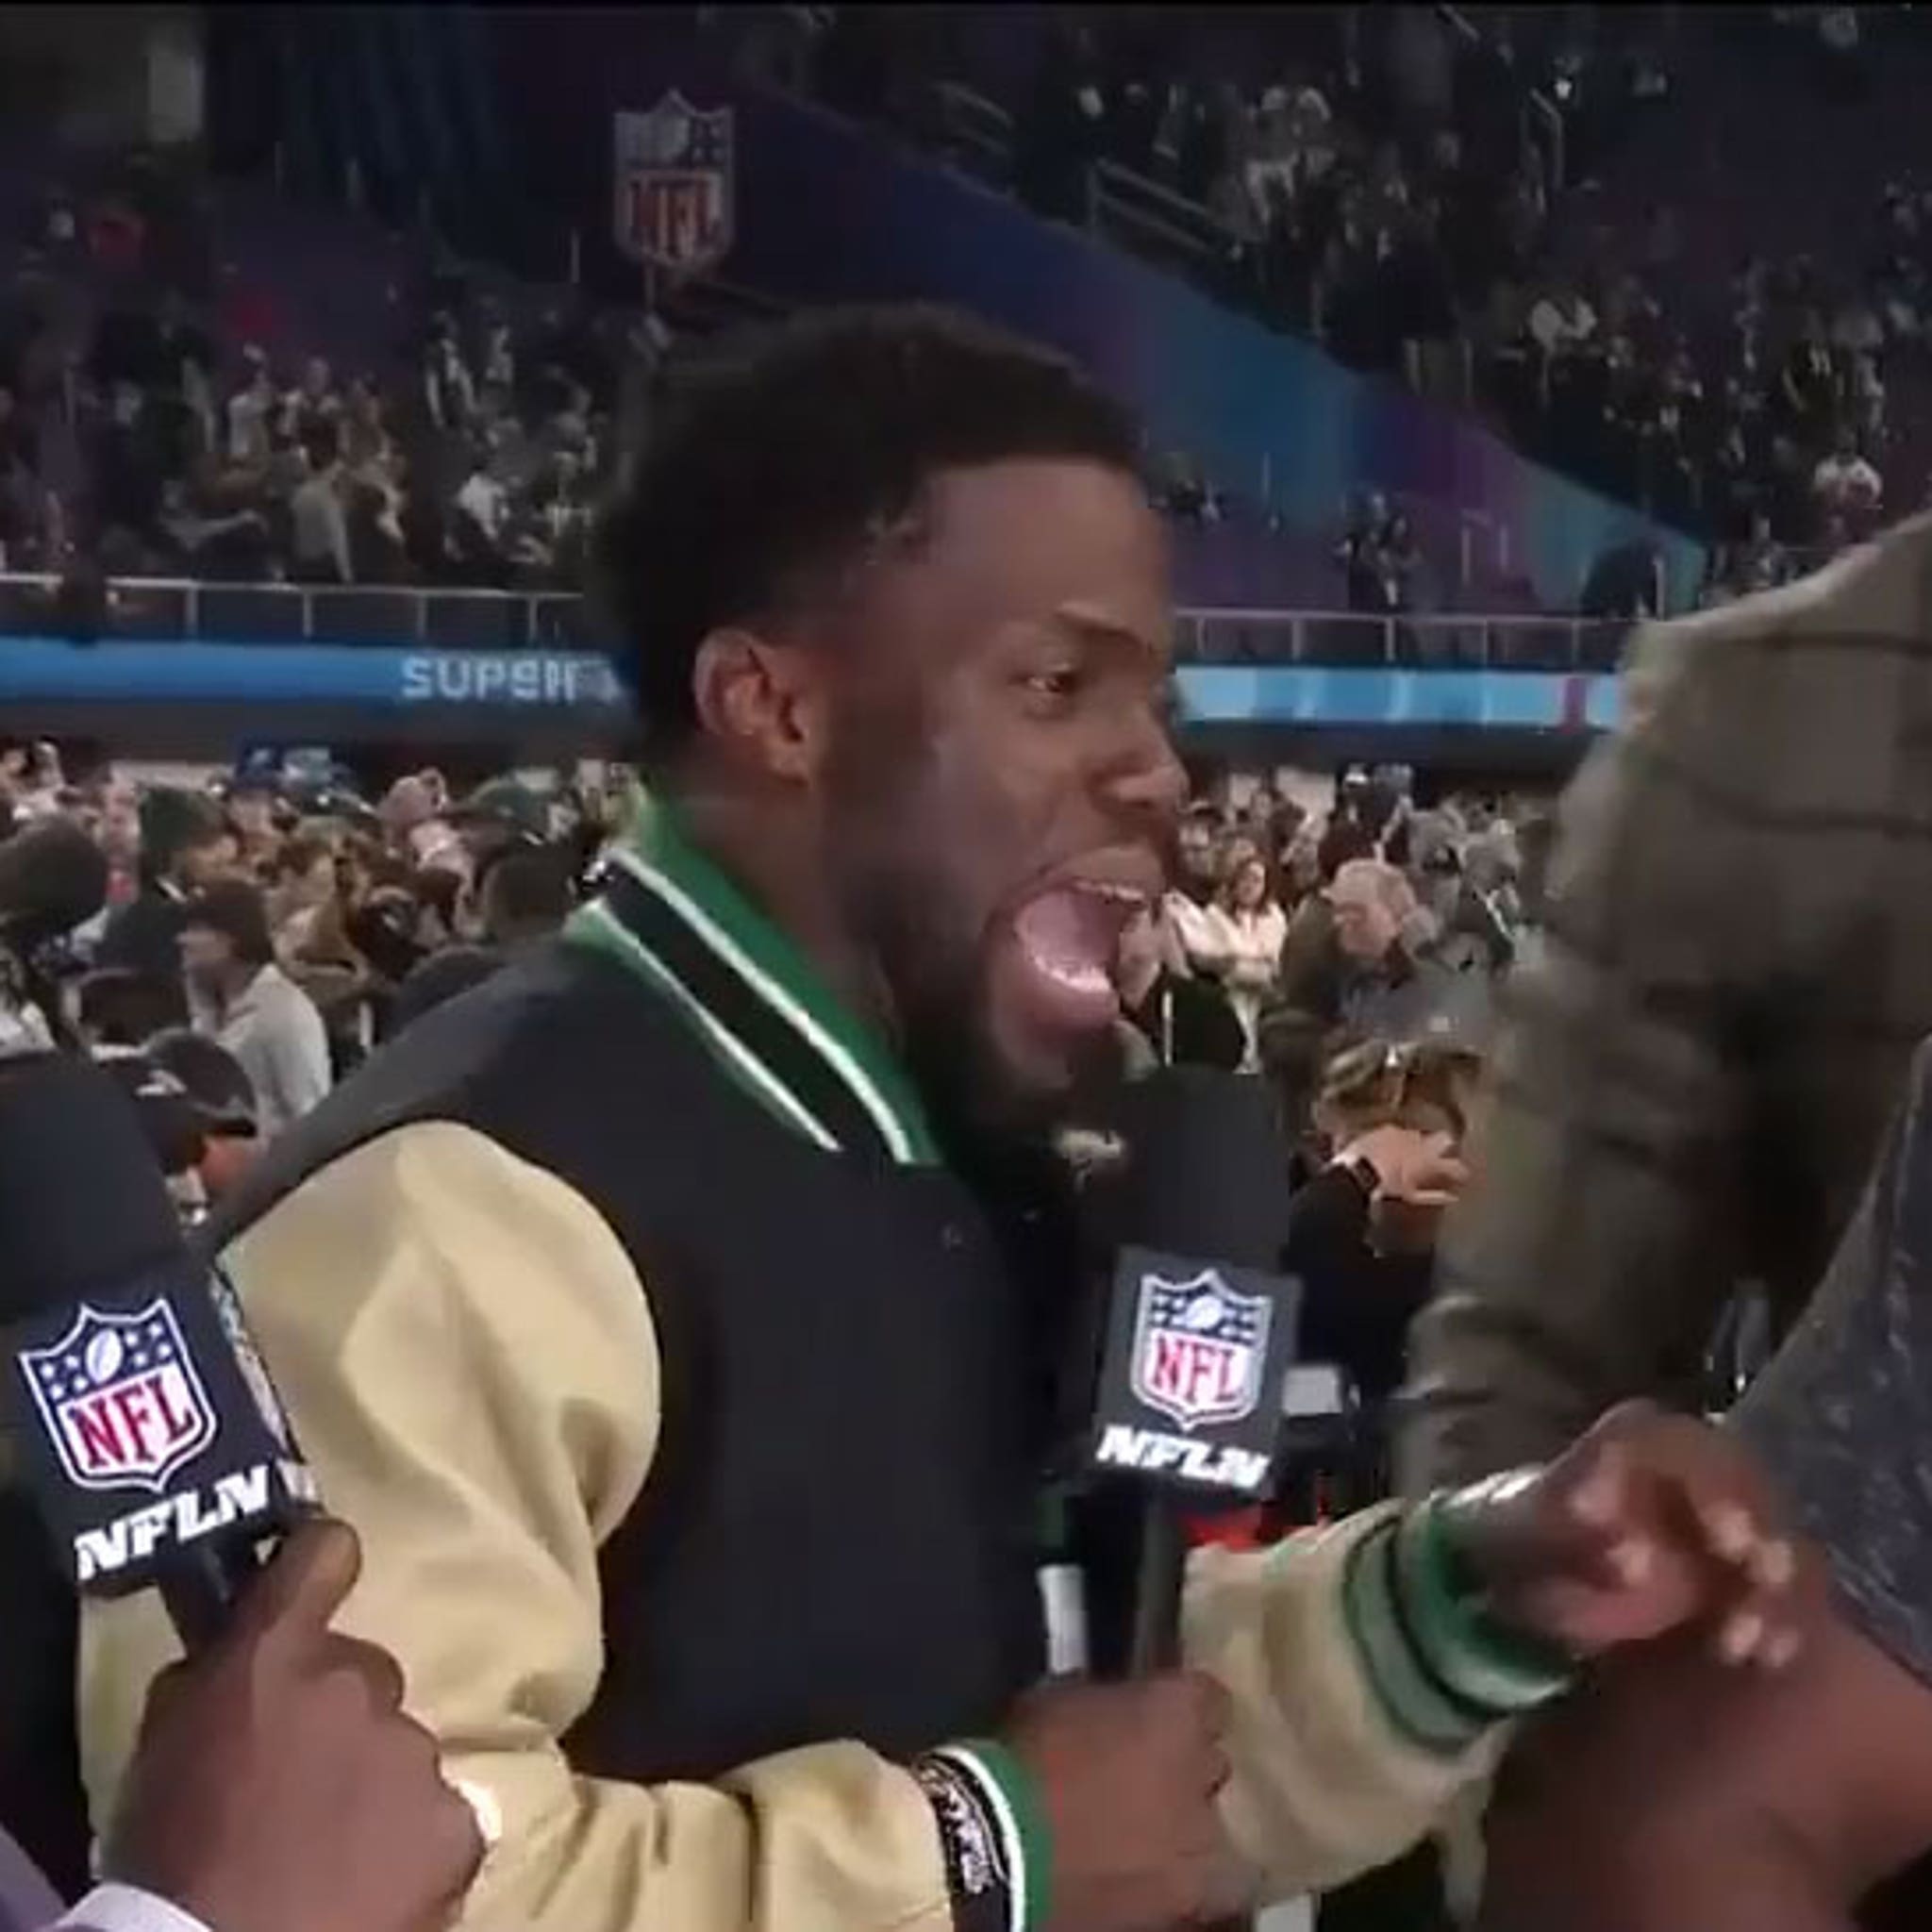 Kevin Hart Wasted Drunk at Super Bowl, Kicked Off NFL Network